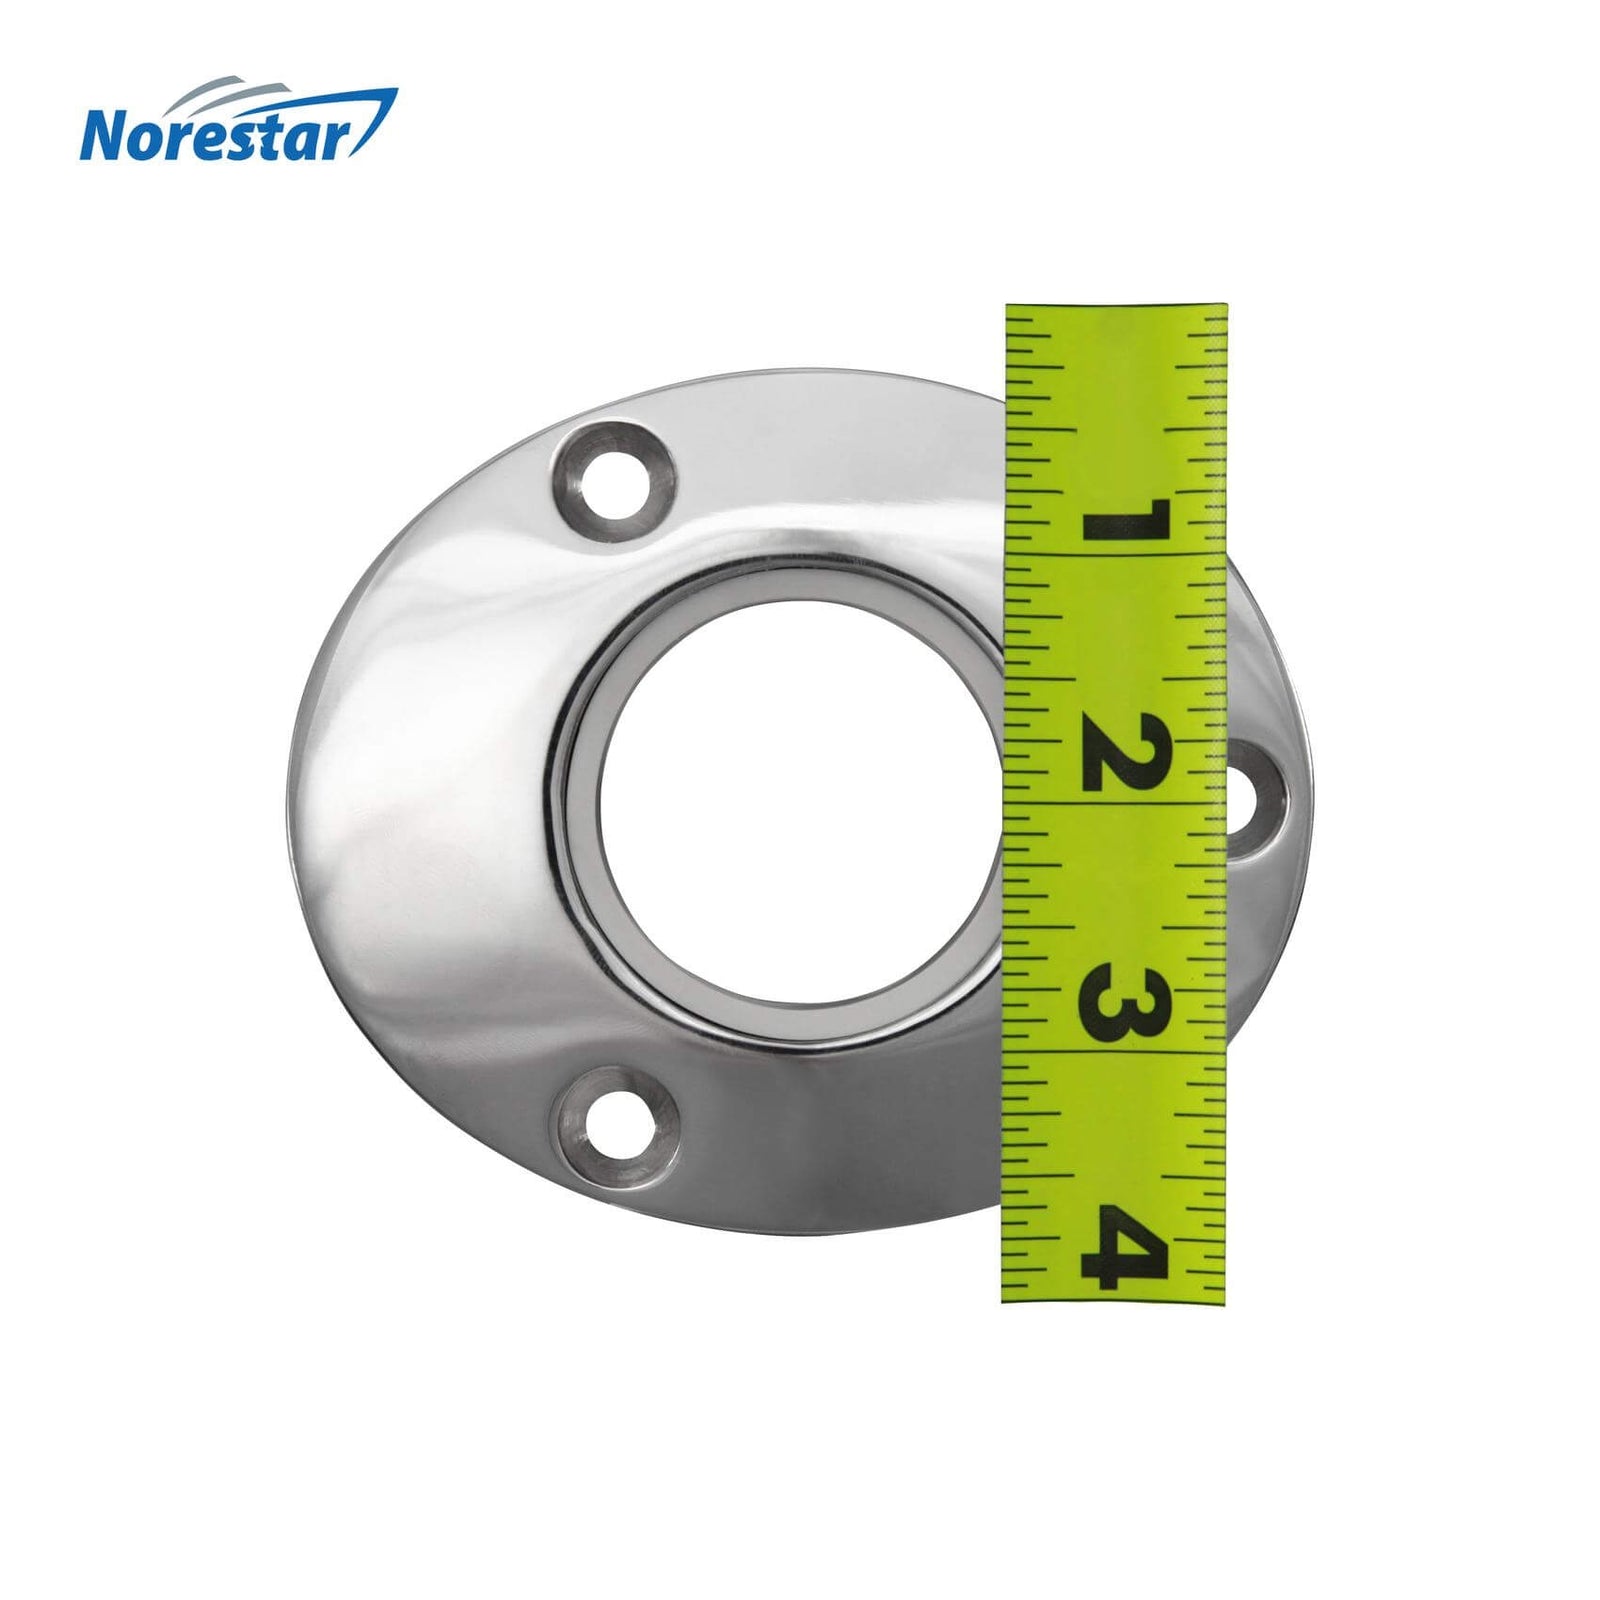 Norestar Stainless Steel Adjustable Clamp On Fishing Rod & Pole